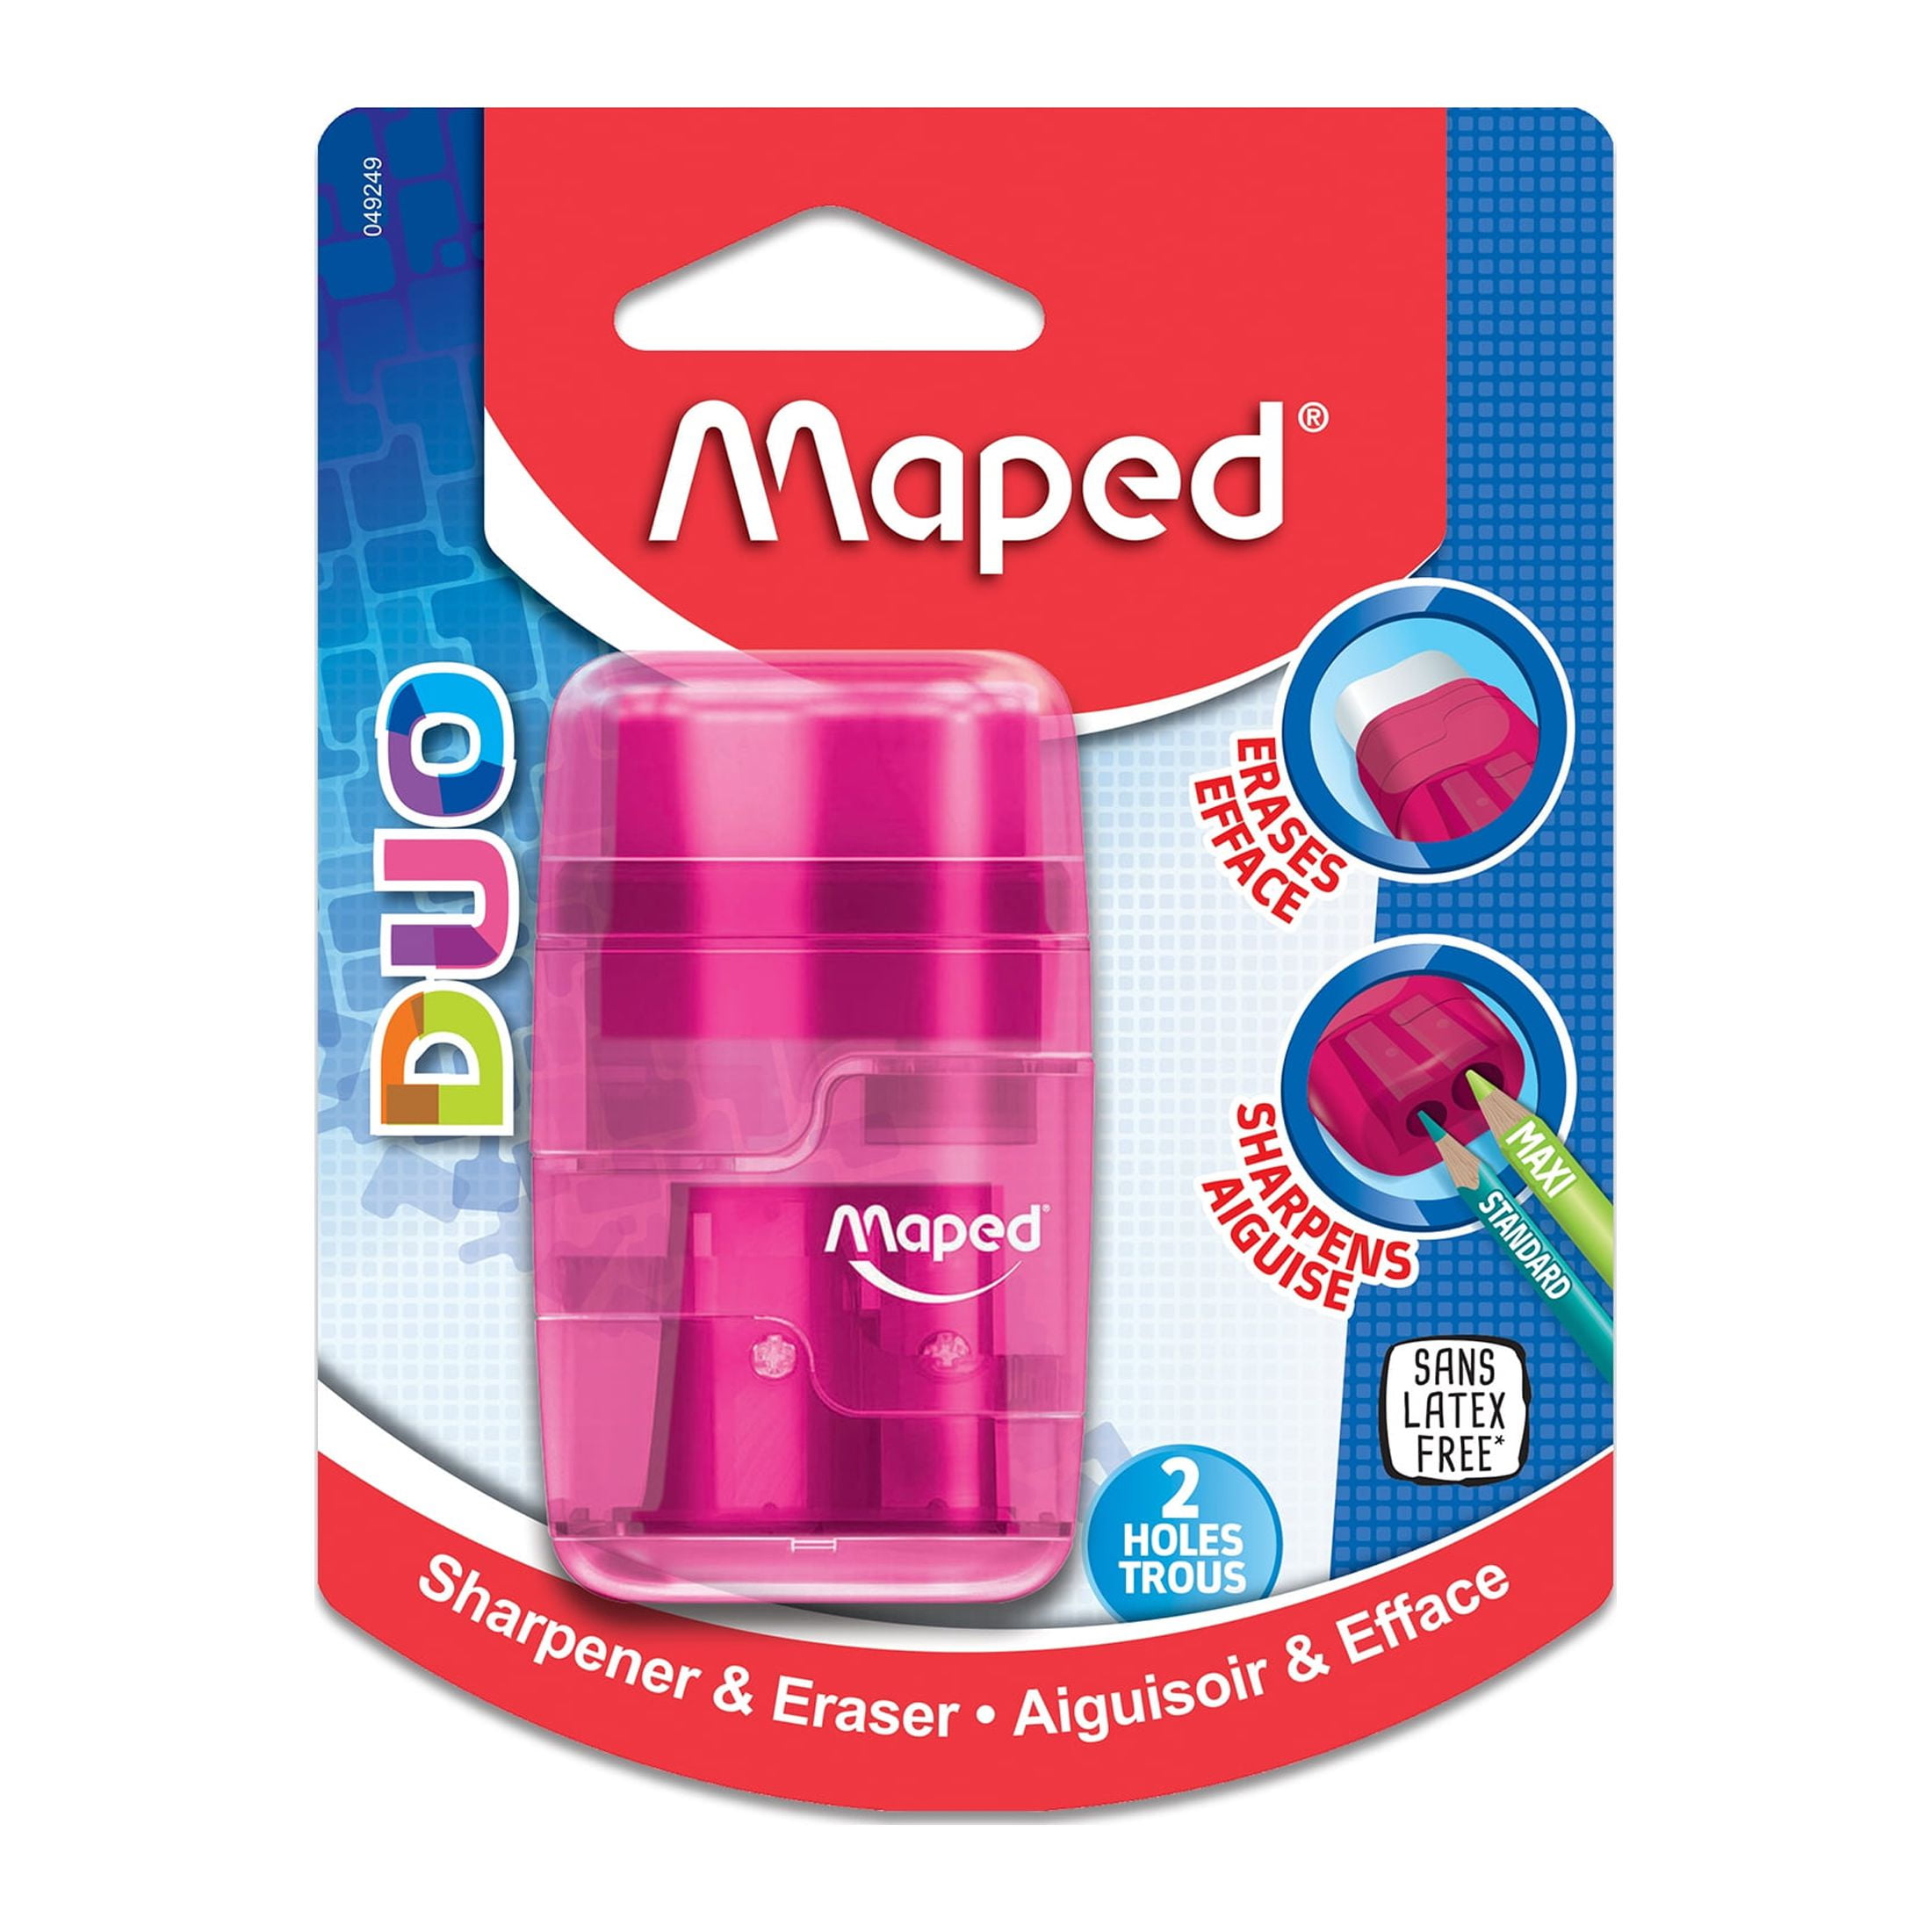 Maped Connect DUO 2-Hole Canister Pencil Sharpener & Eraser Combo